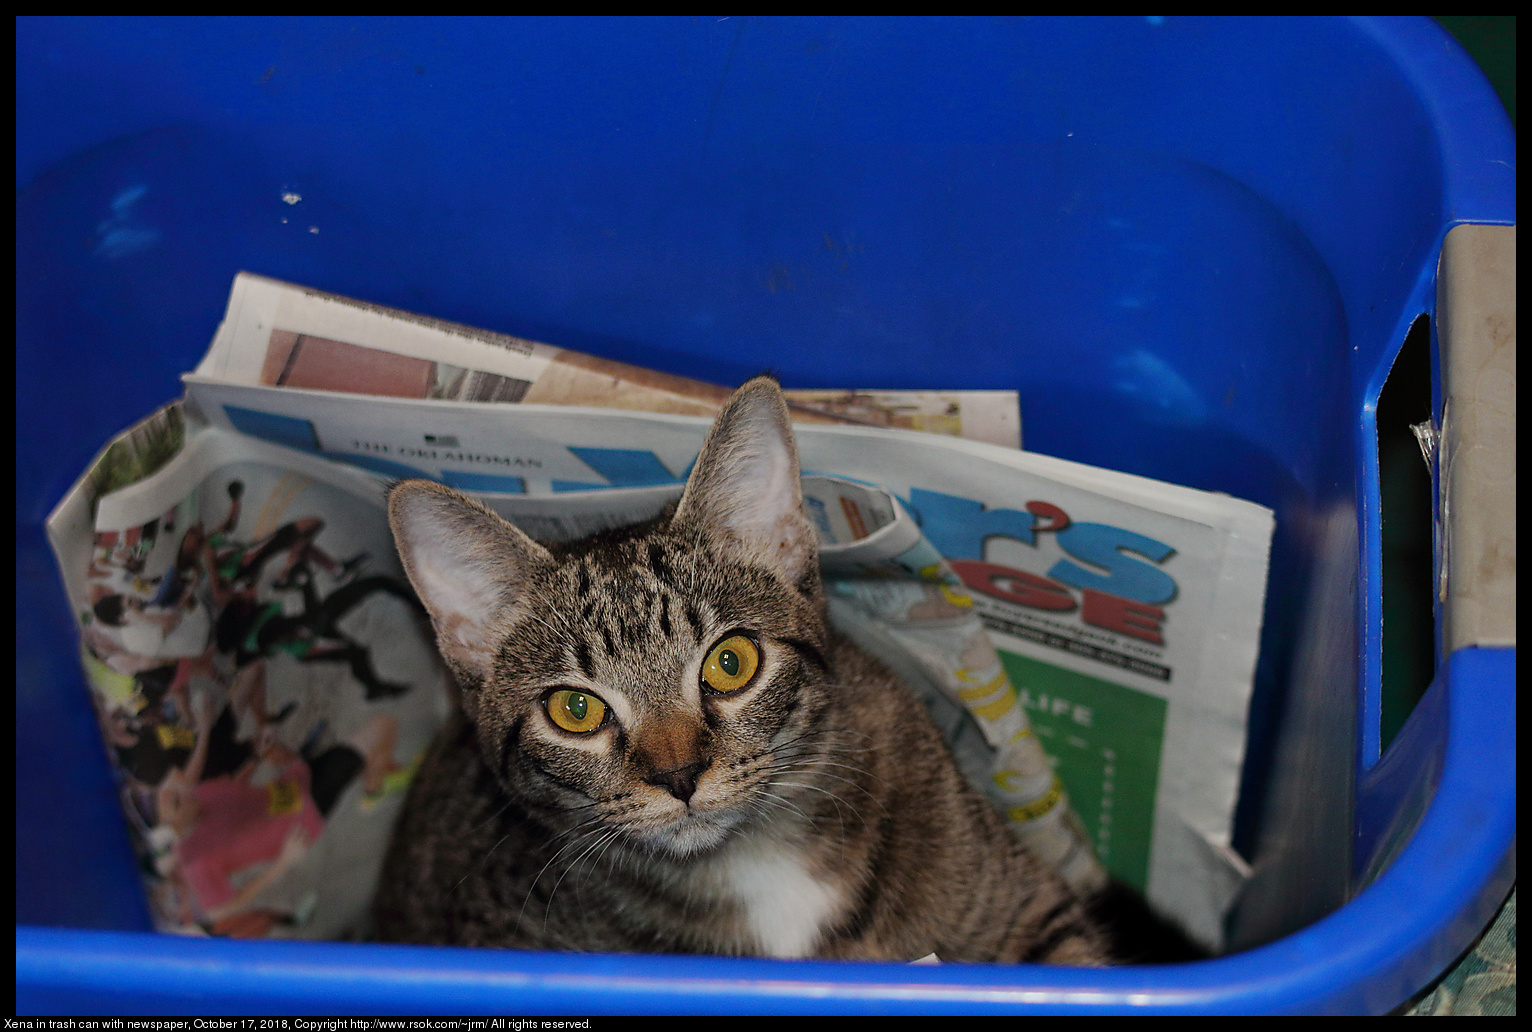 Xena in trash can with newspaper, October 17, 2018